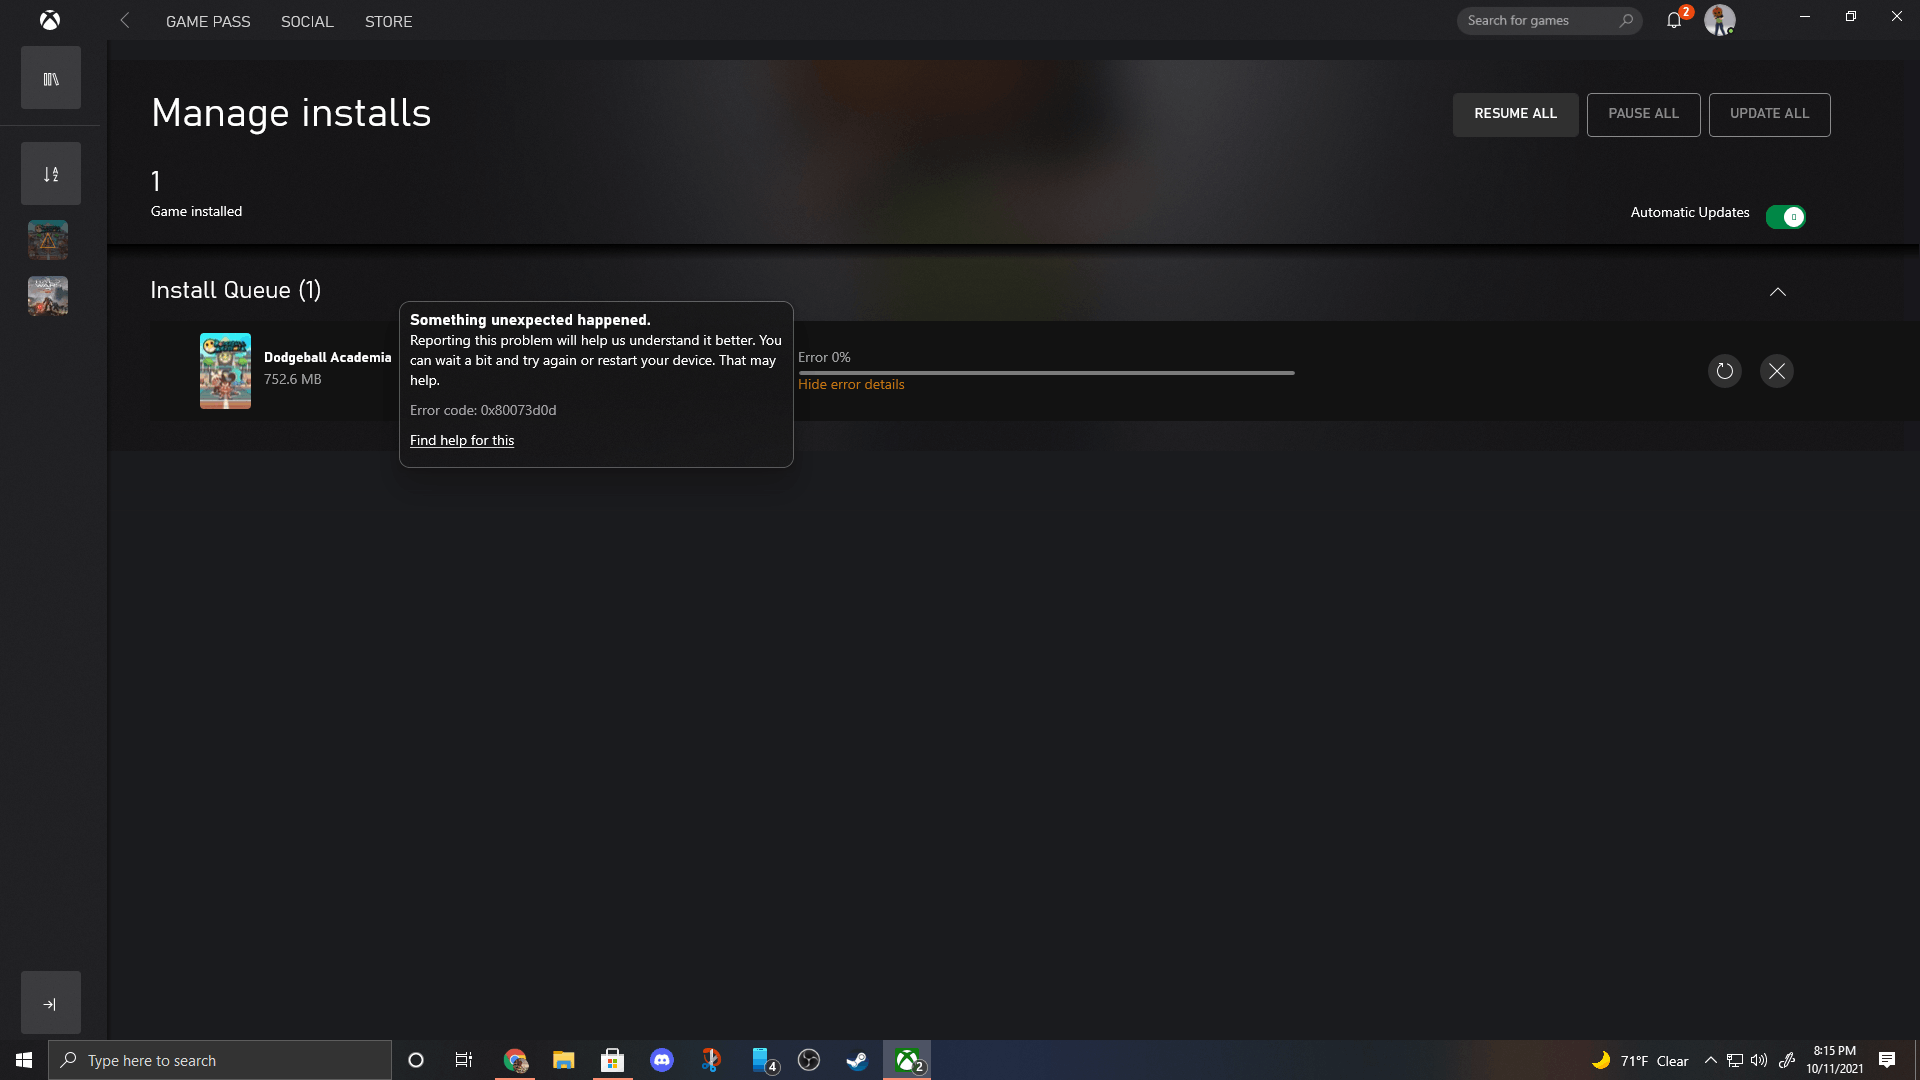 My download on game pass PC is stuck. Stays at 0B/s and when I